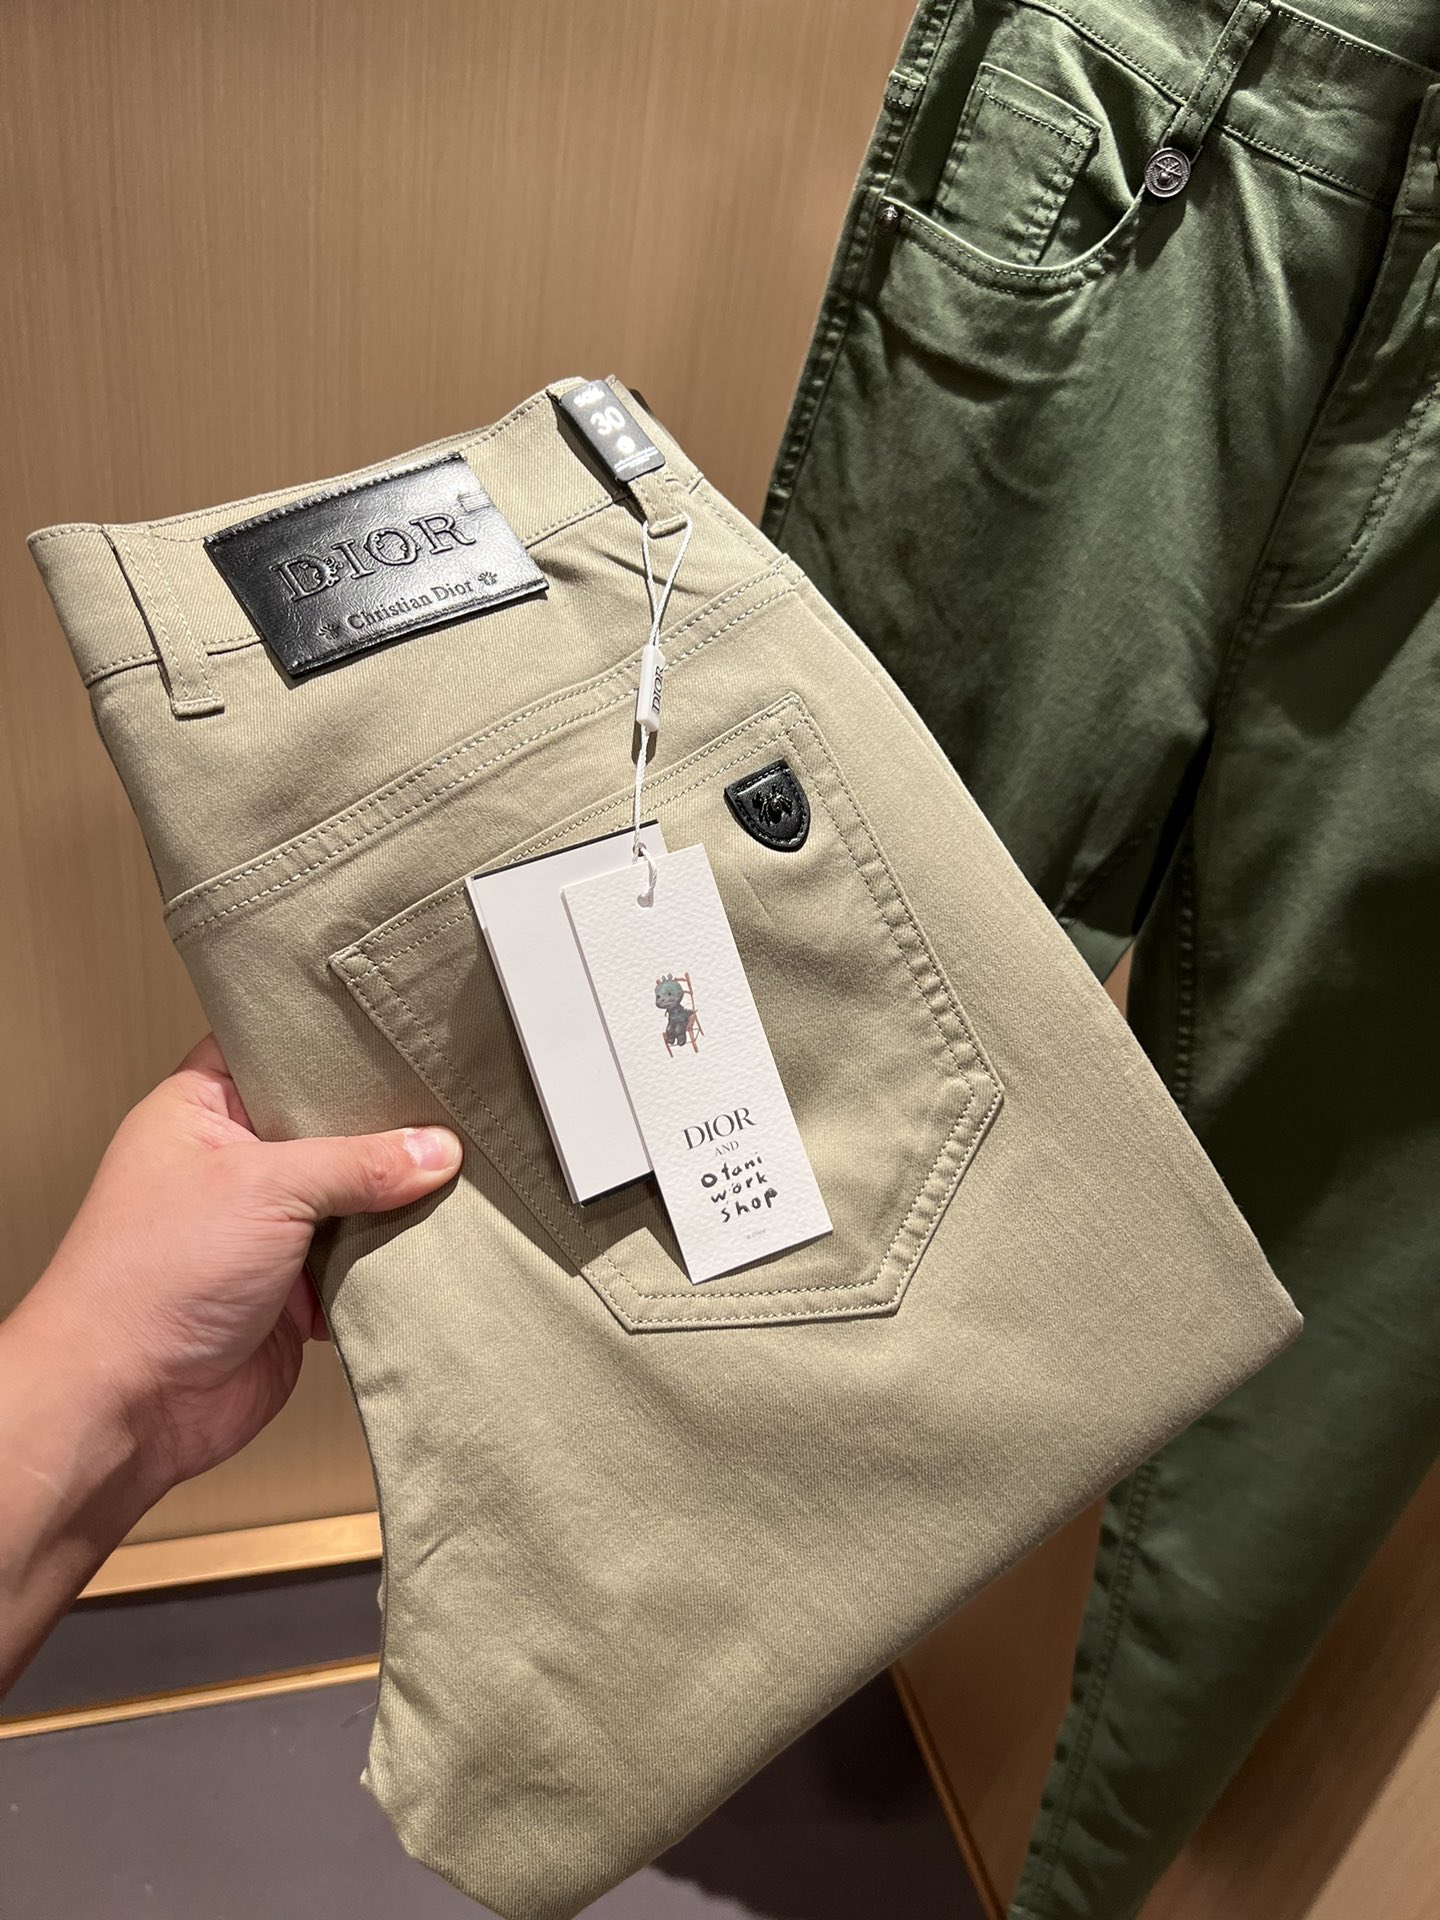 Dior Clothing Pants & Trousers for sale cheap now
 Men Cotton Spring/Summer Collection Fashion Casual